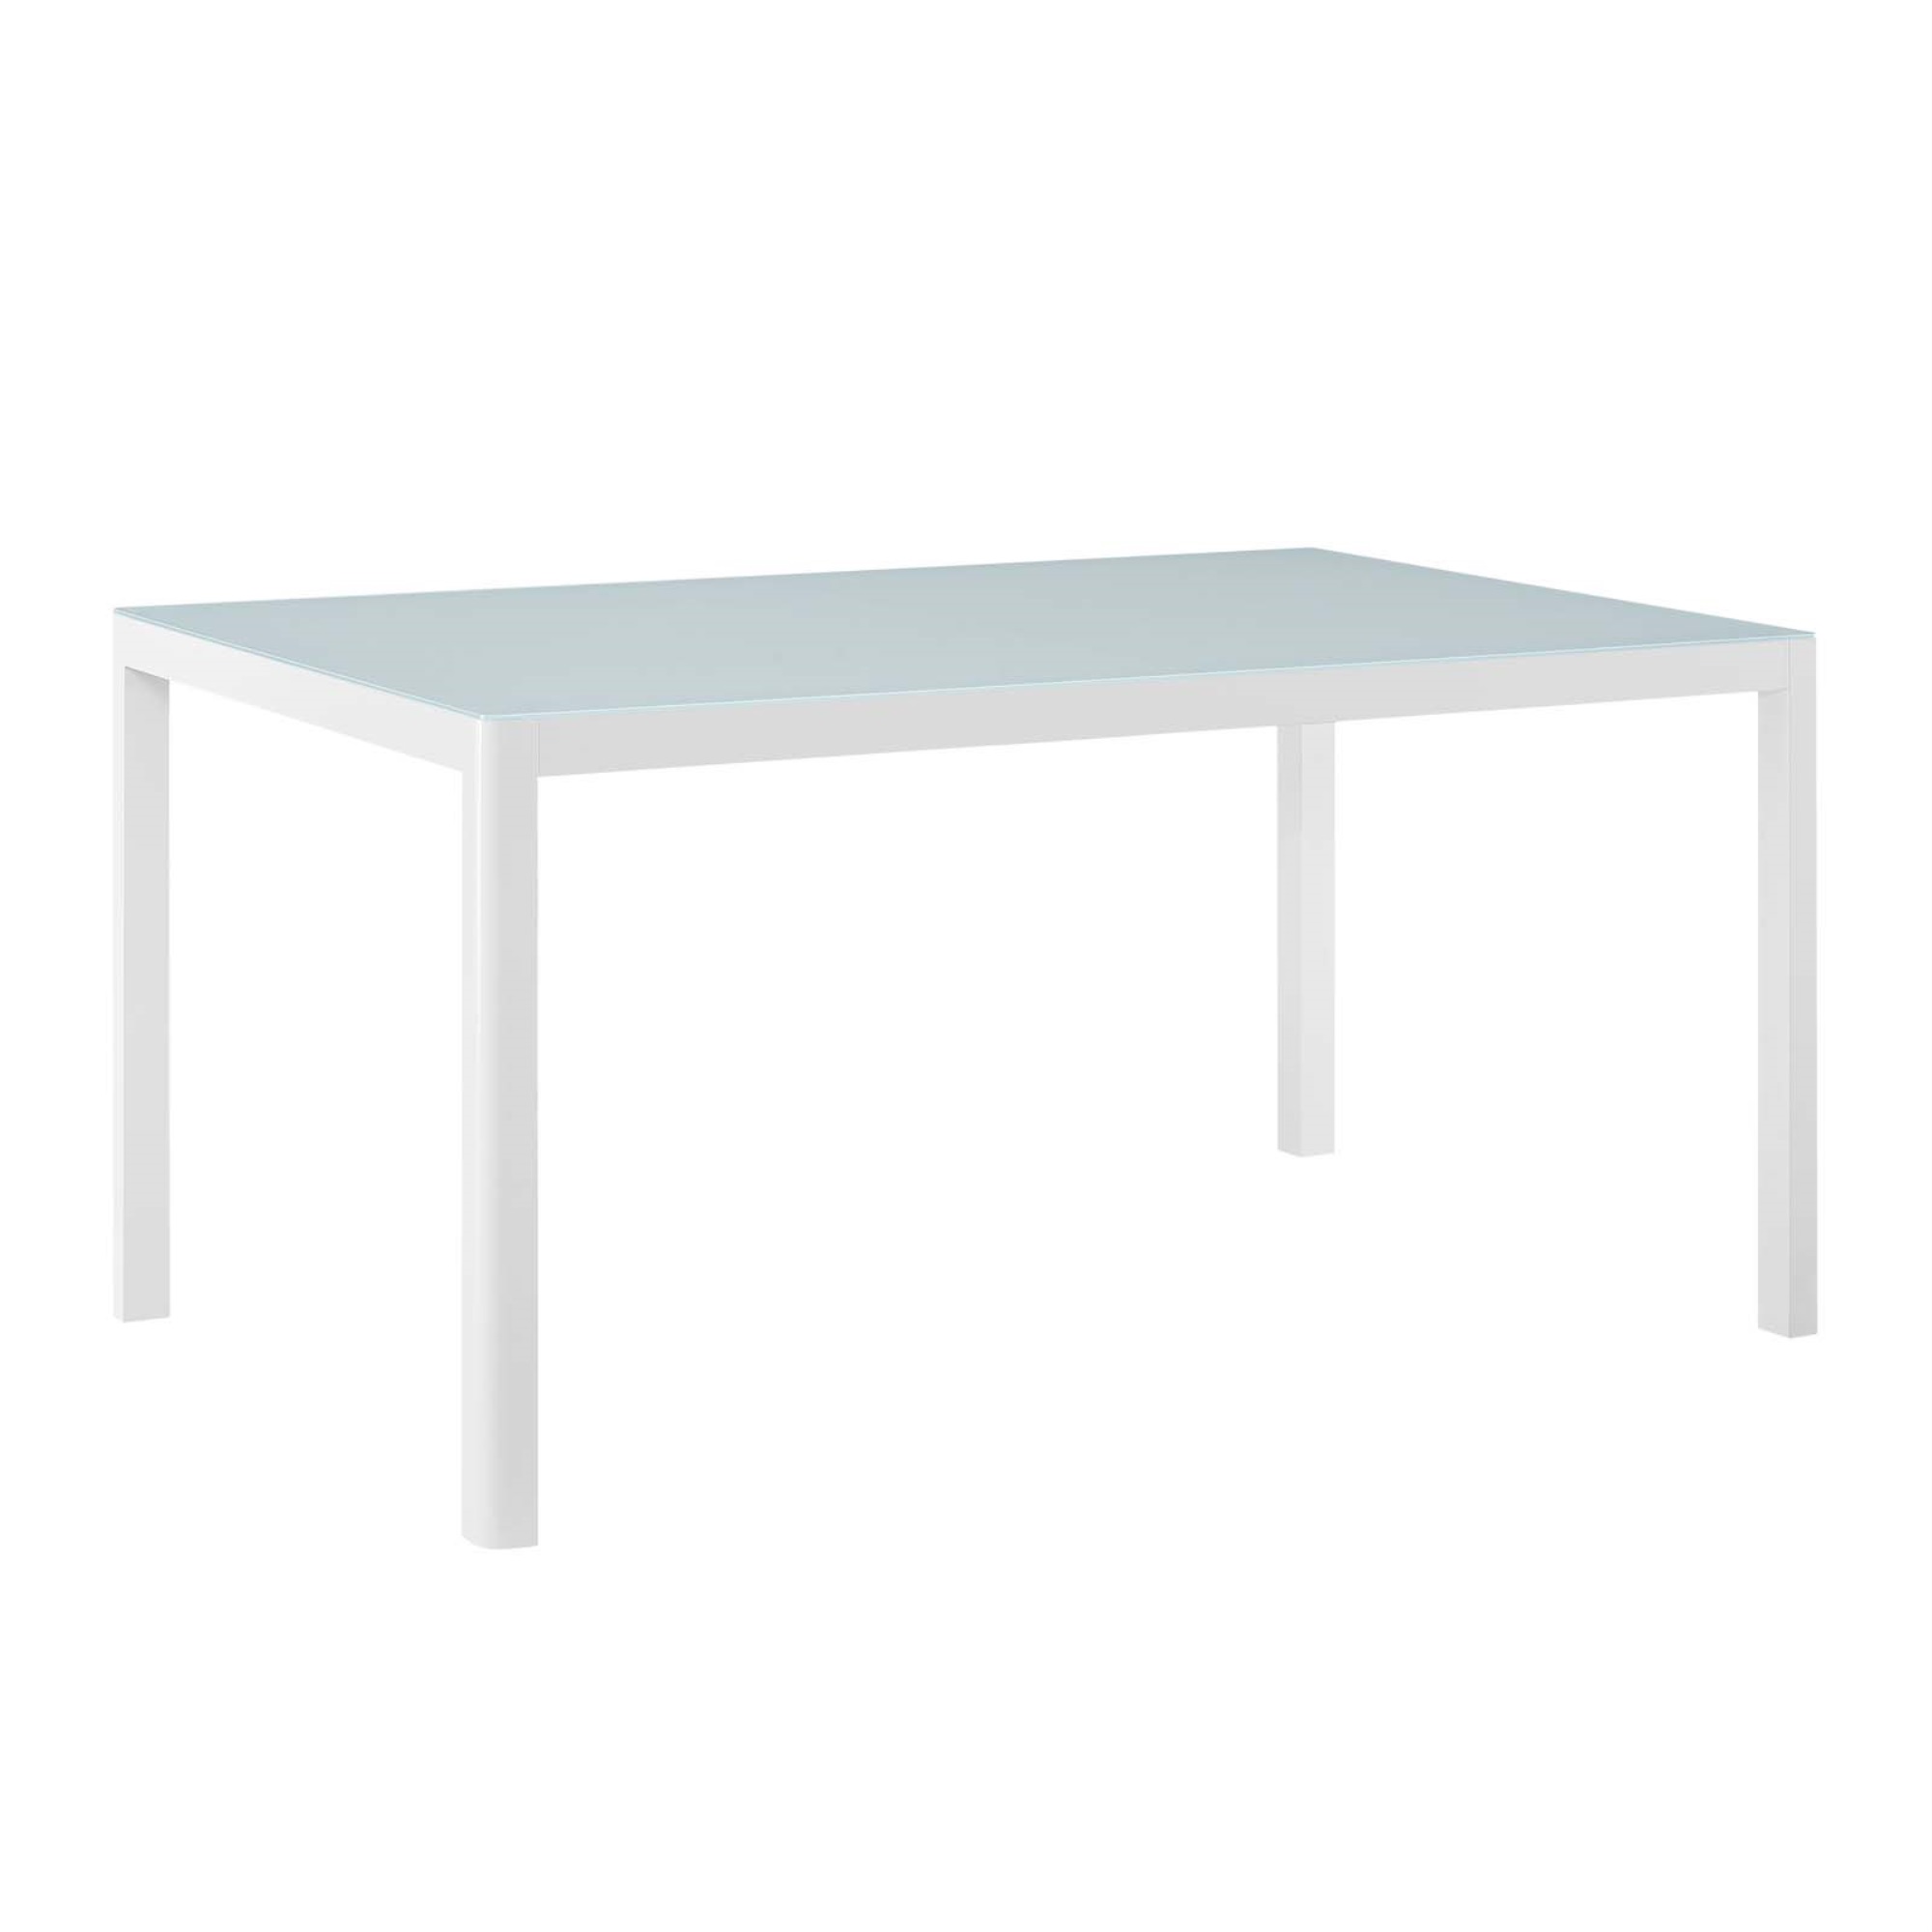 Ergode Raleigh 59" Outdoor Patio Aluminum Dining Table - White